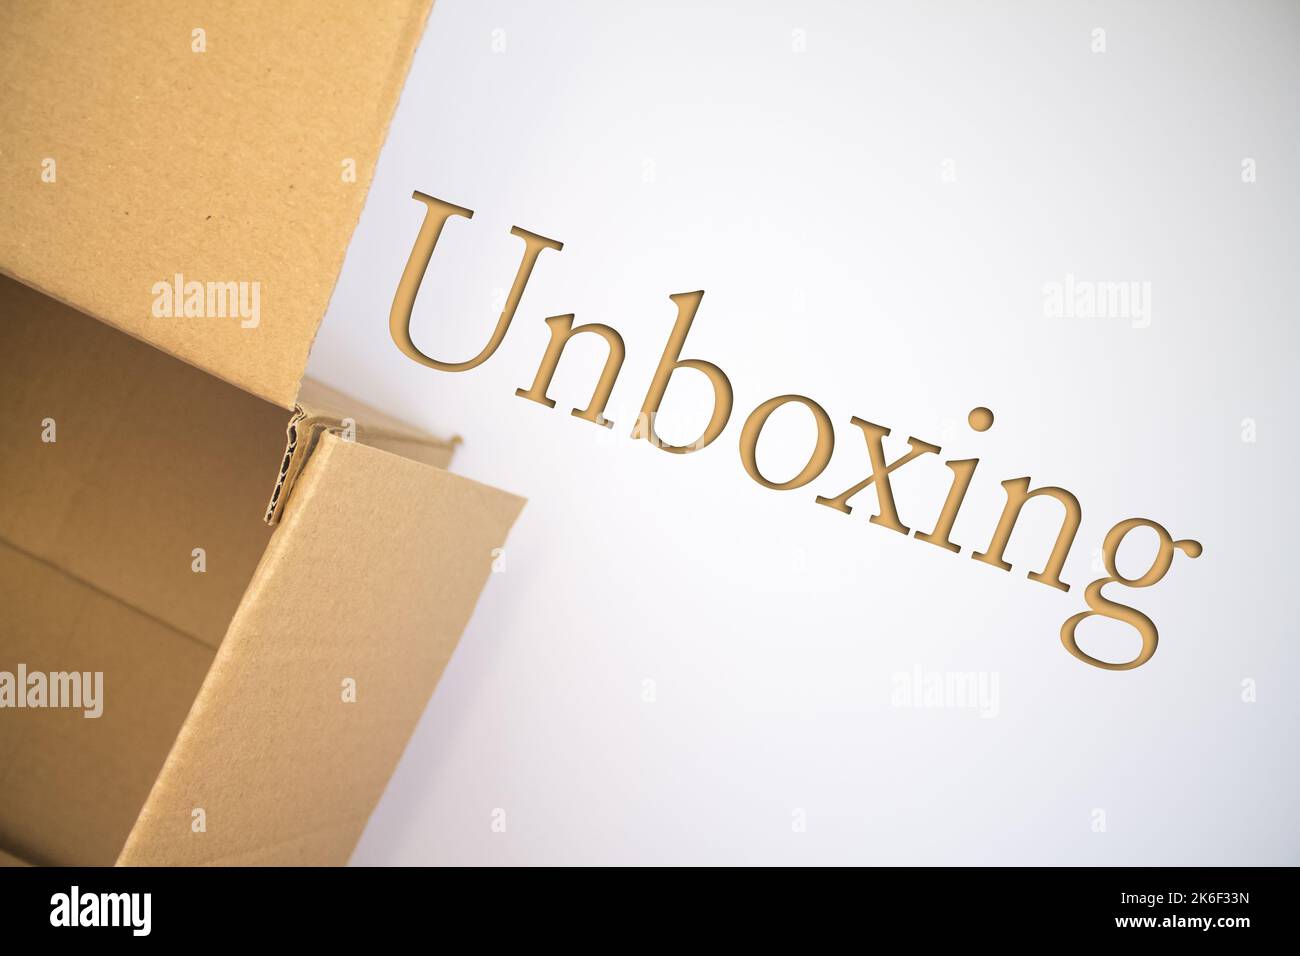 Unboxing word with cardboard box. Brown folded card box. Stock Photo